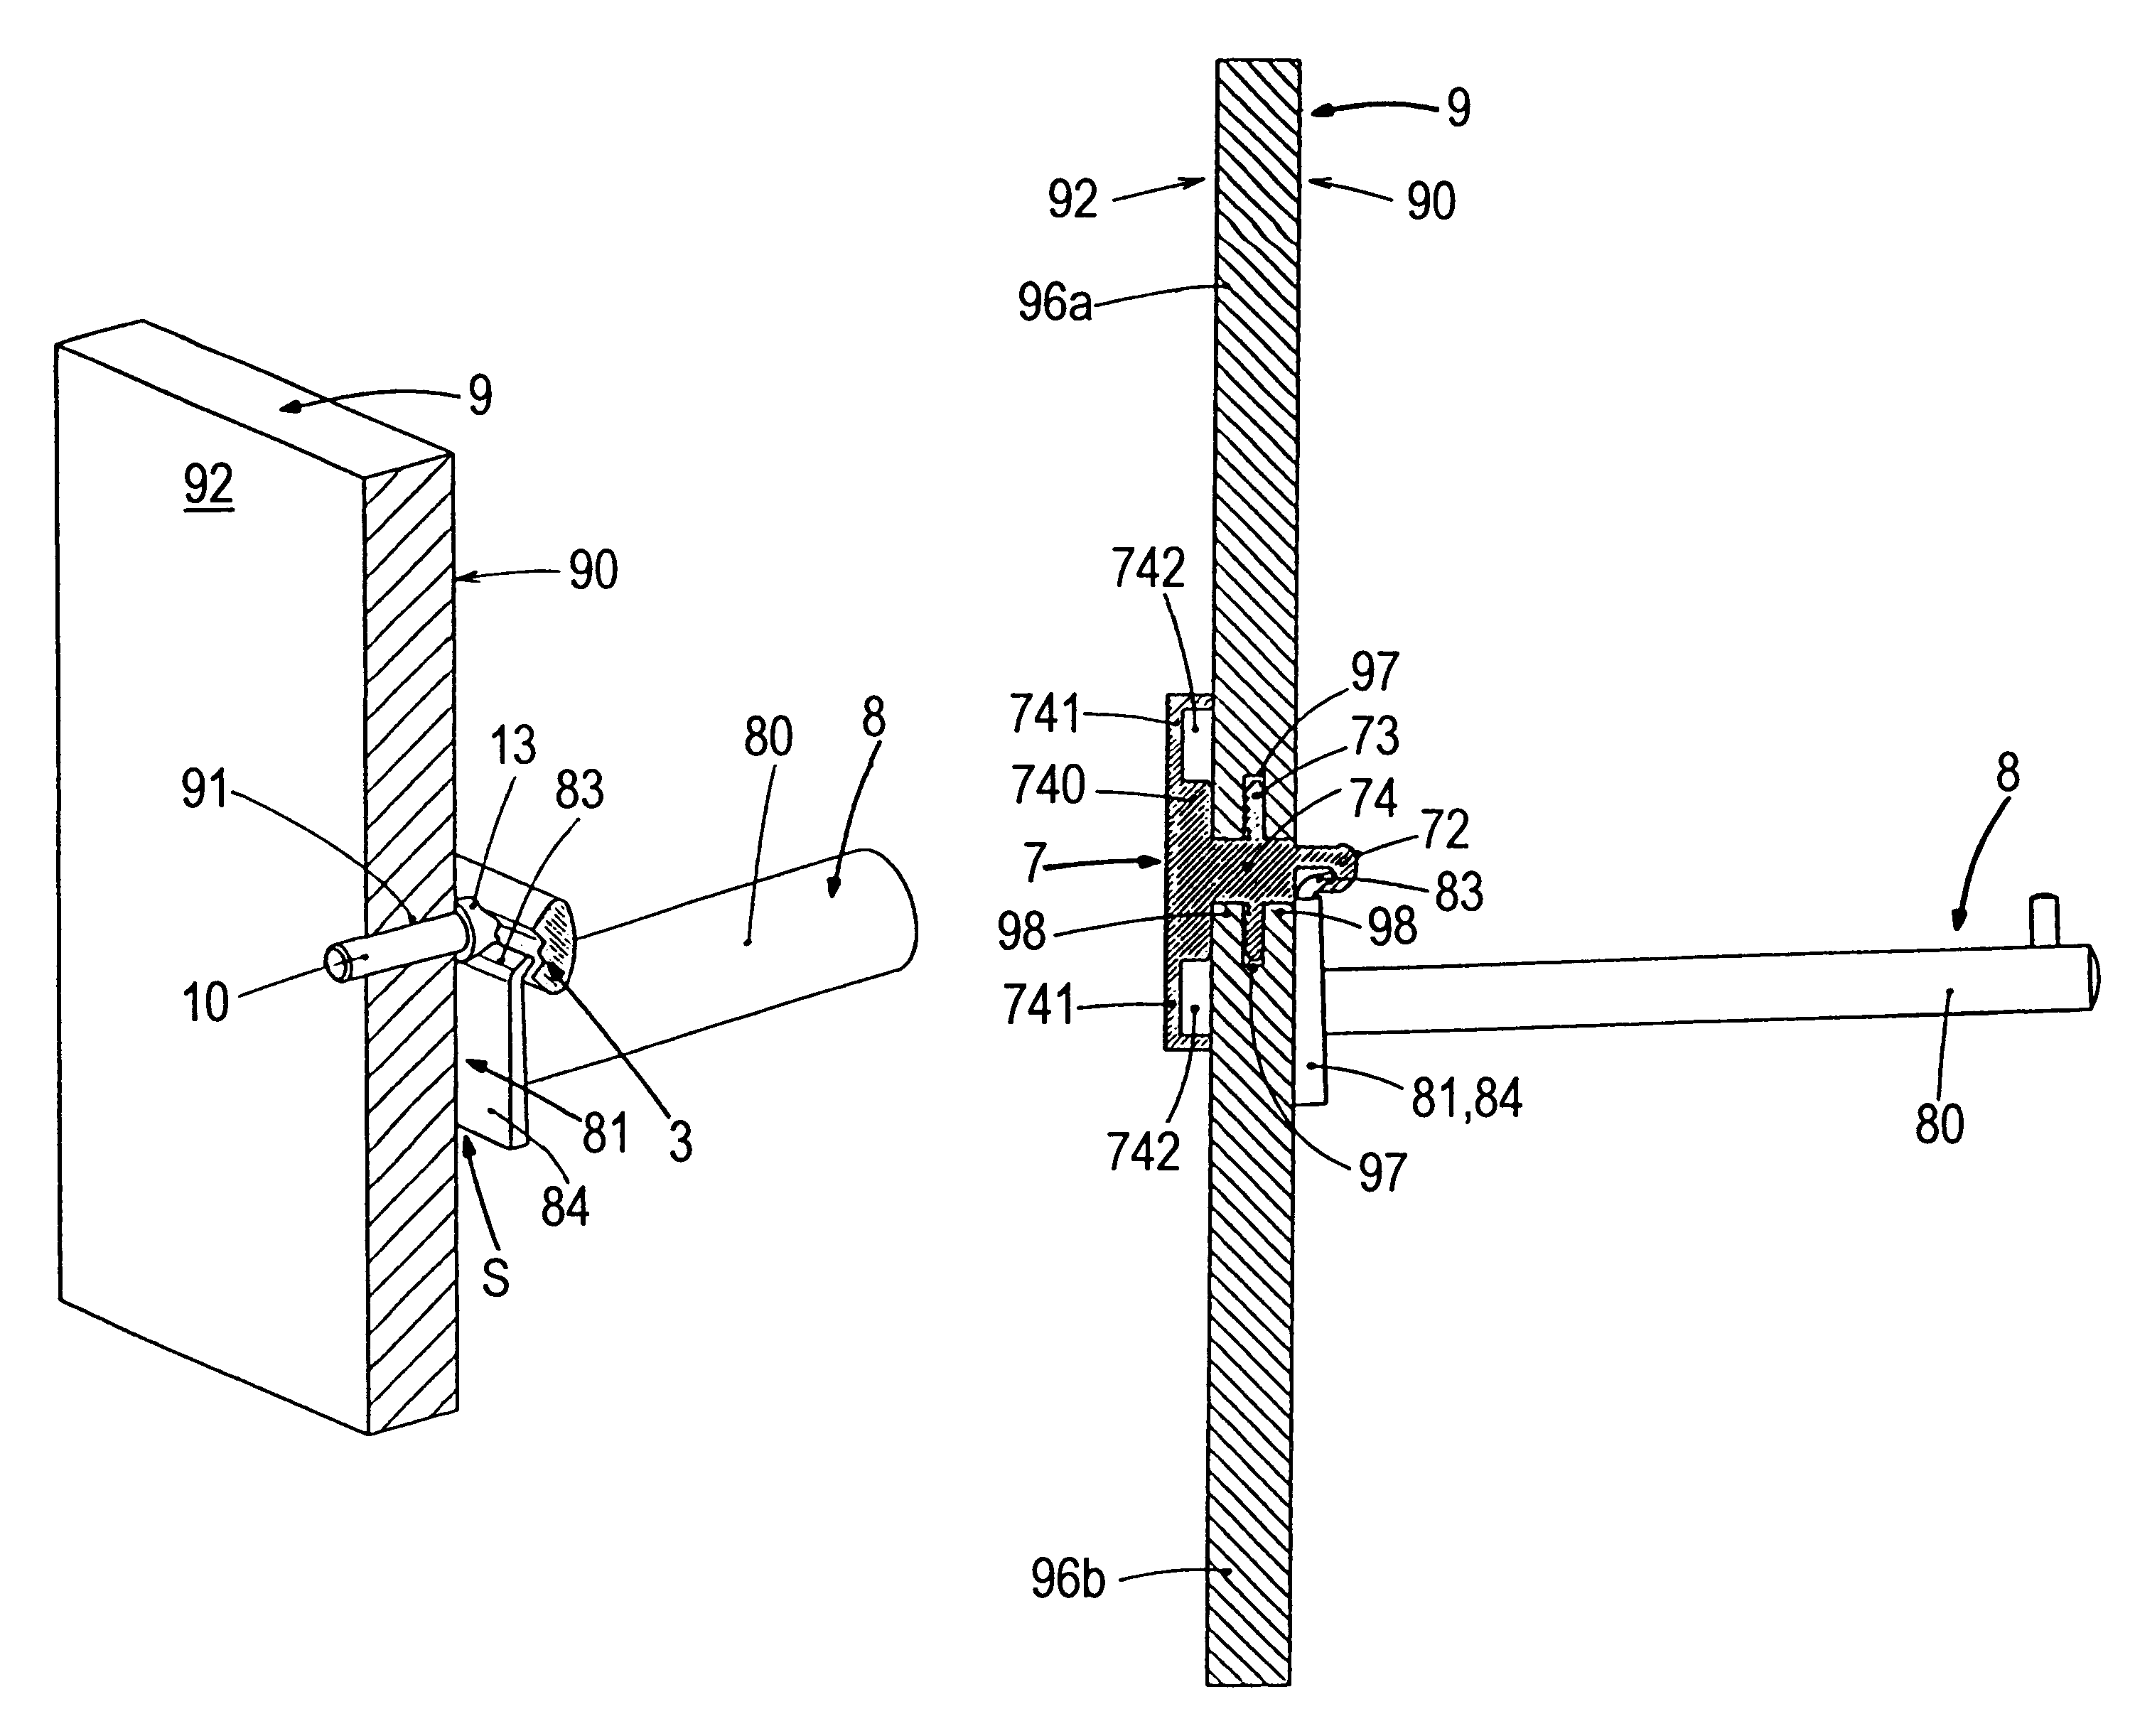 Display device for presentation of goods